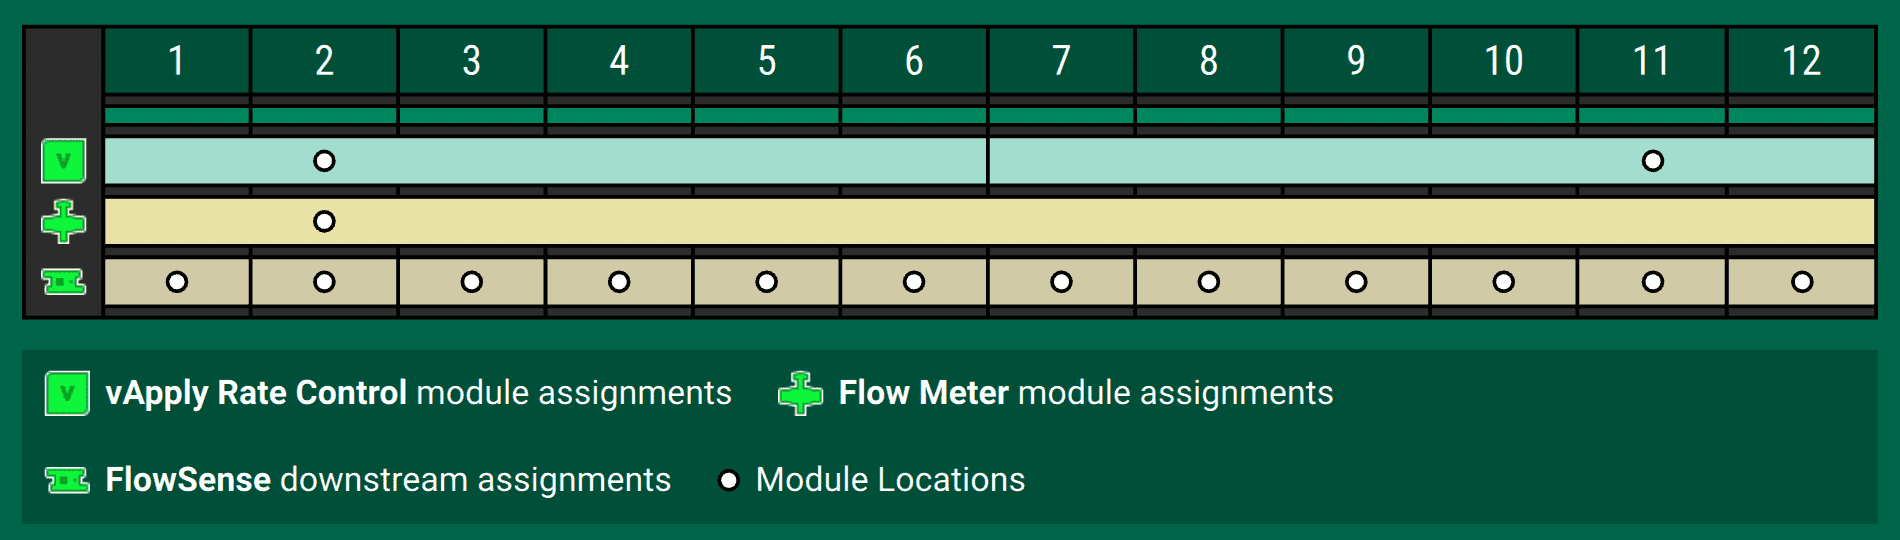 This chart shows how hardware maps onto rows for a 12-row planter set up with two vApply Rate Control modules, one vApplyHD module, and 12 FlowSense modules. Note that each module is one circle, and it is aligned with the row it is installed on. The segments in each row represent the range of rows that each module is in charge of. In this image, for example, the vApply Rate Control module on row 2 controls rows 1-6, while rows 7-12 are controlled by the module on row 11.